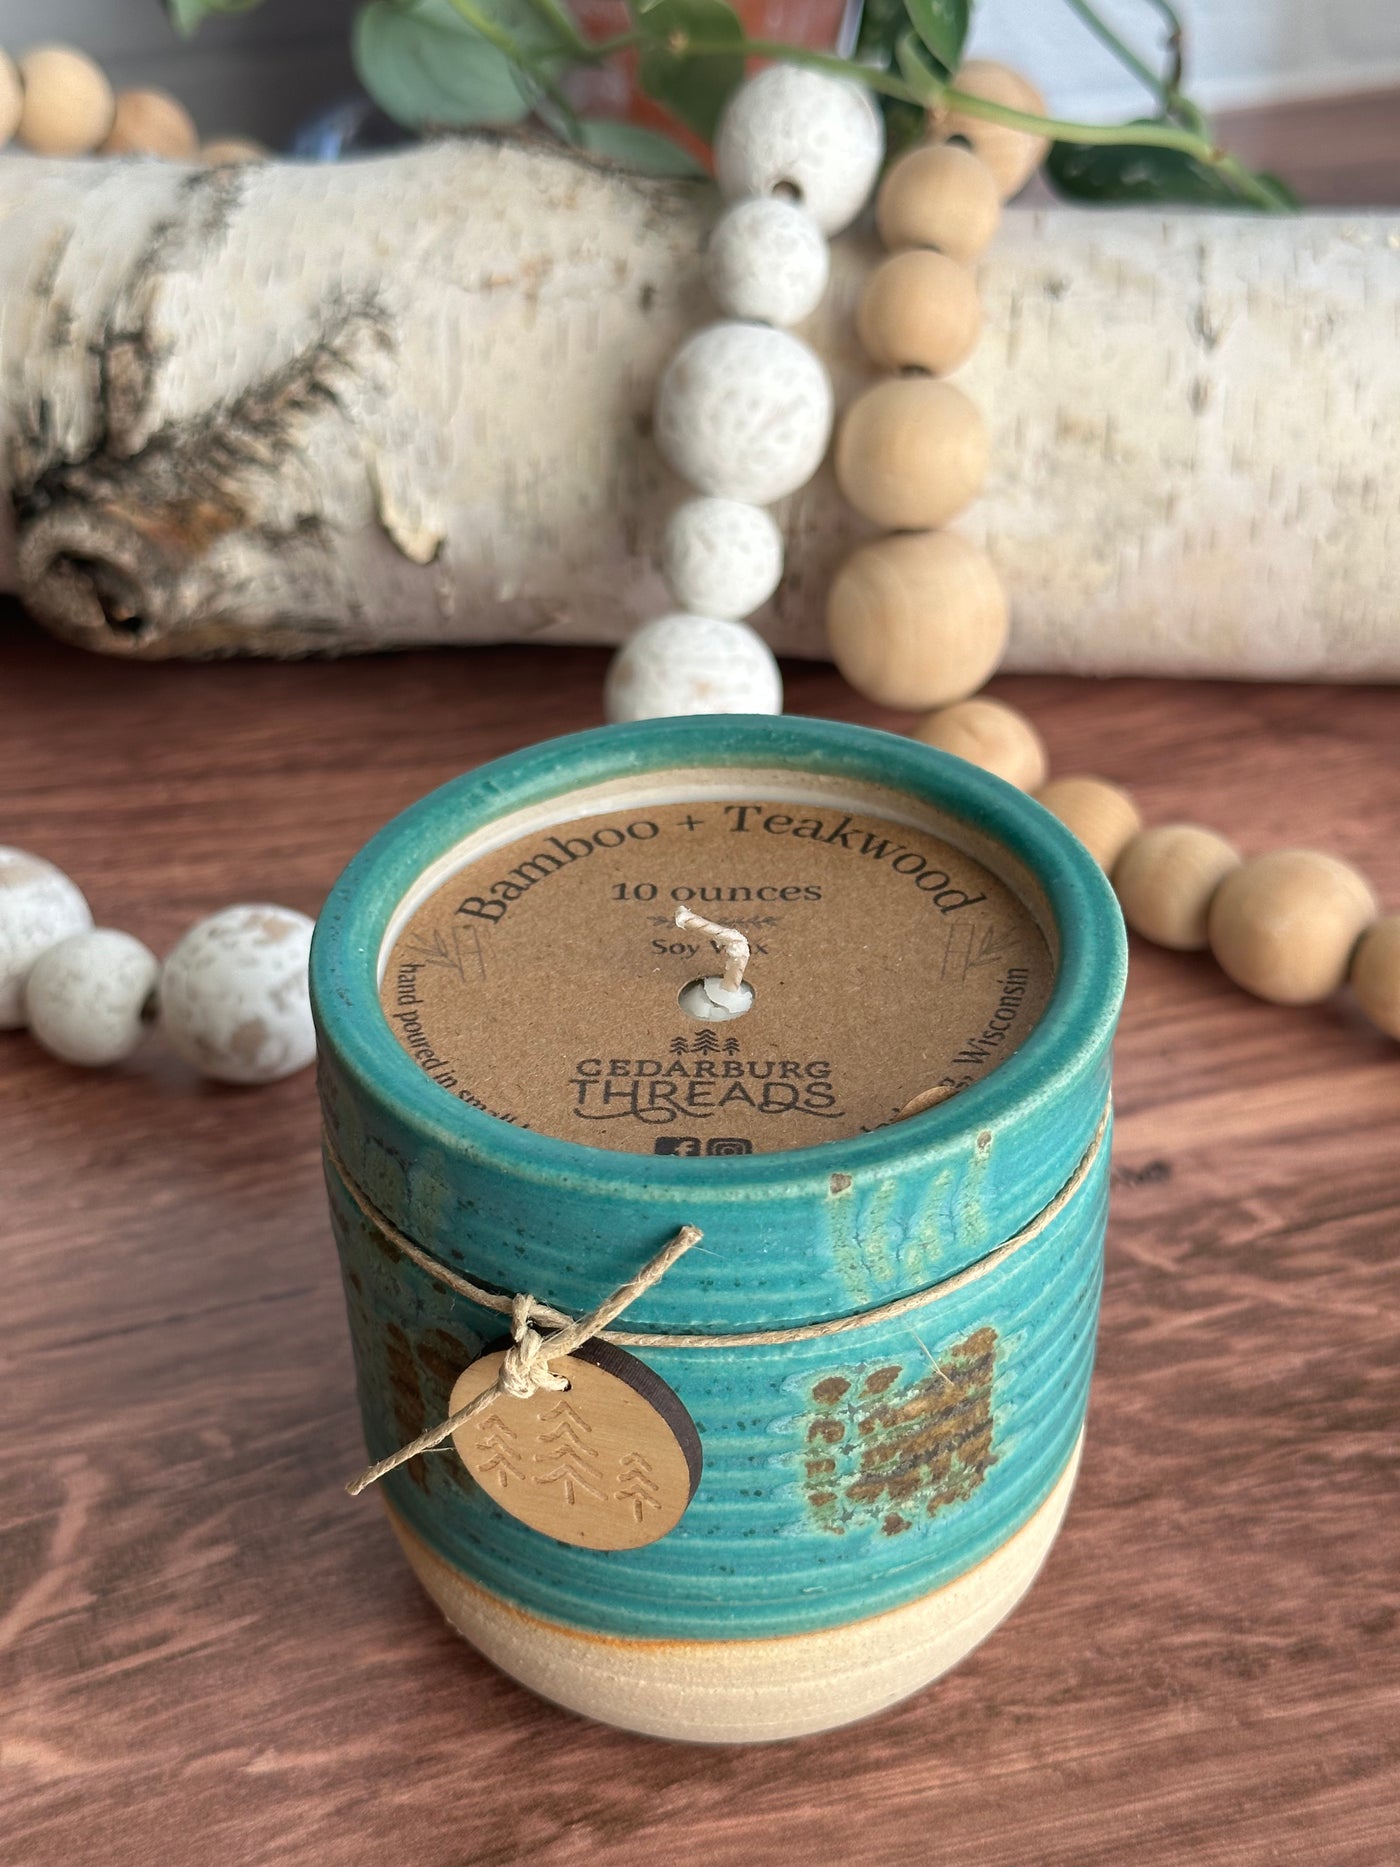 10 oz Bamboo & Teakwood soy candle in teal ceramic vessel